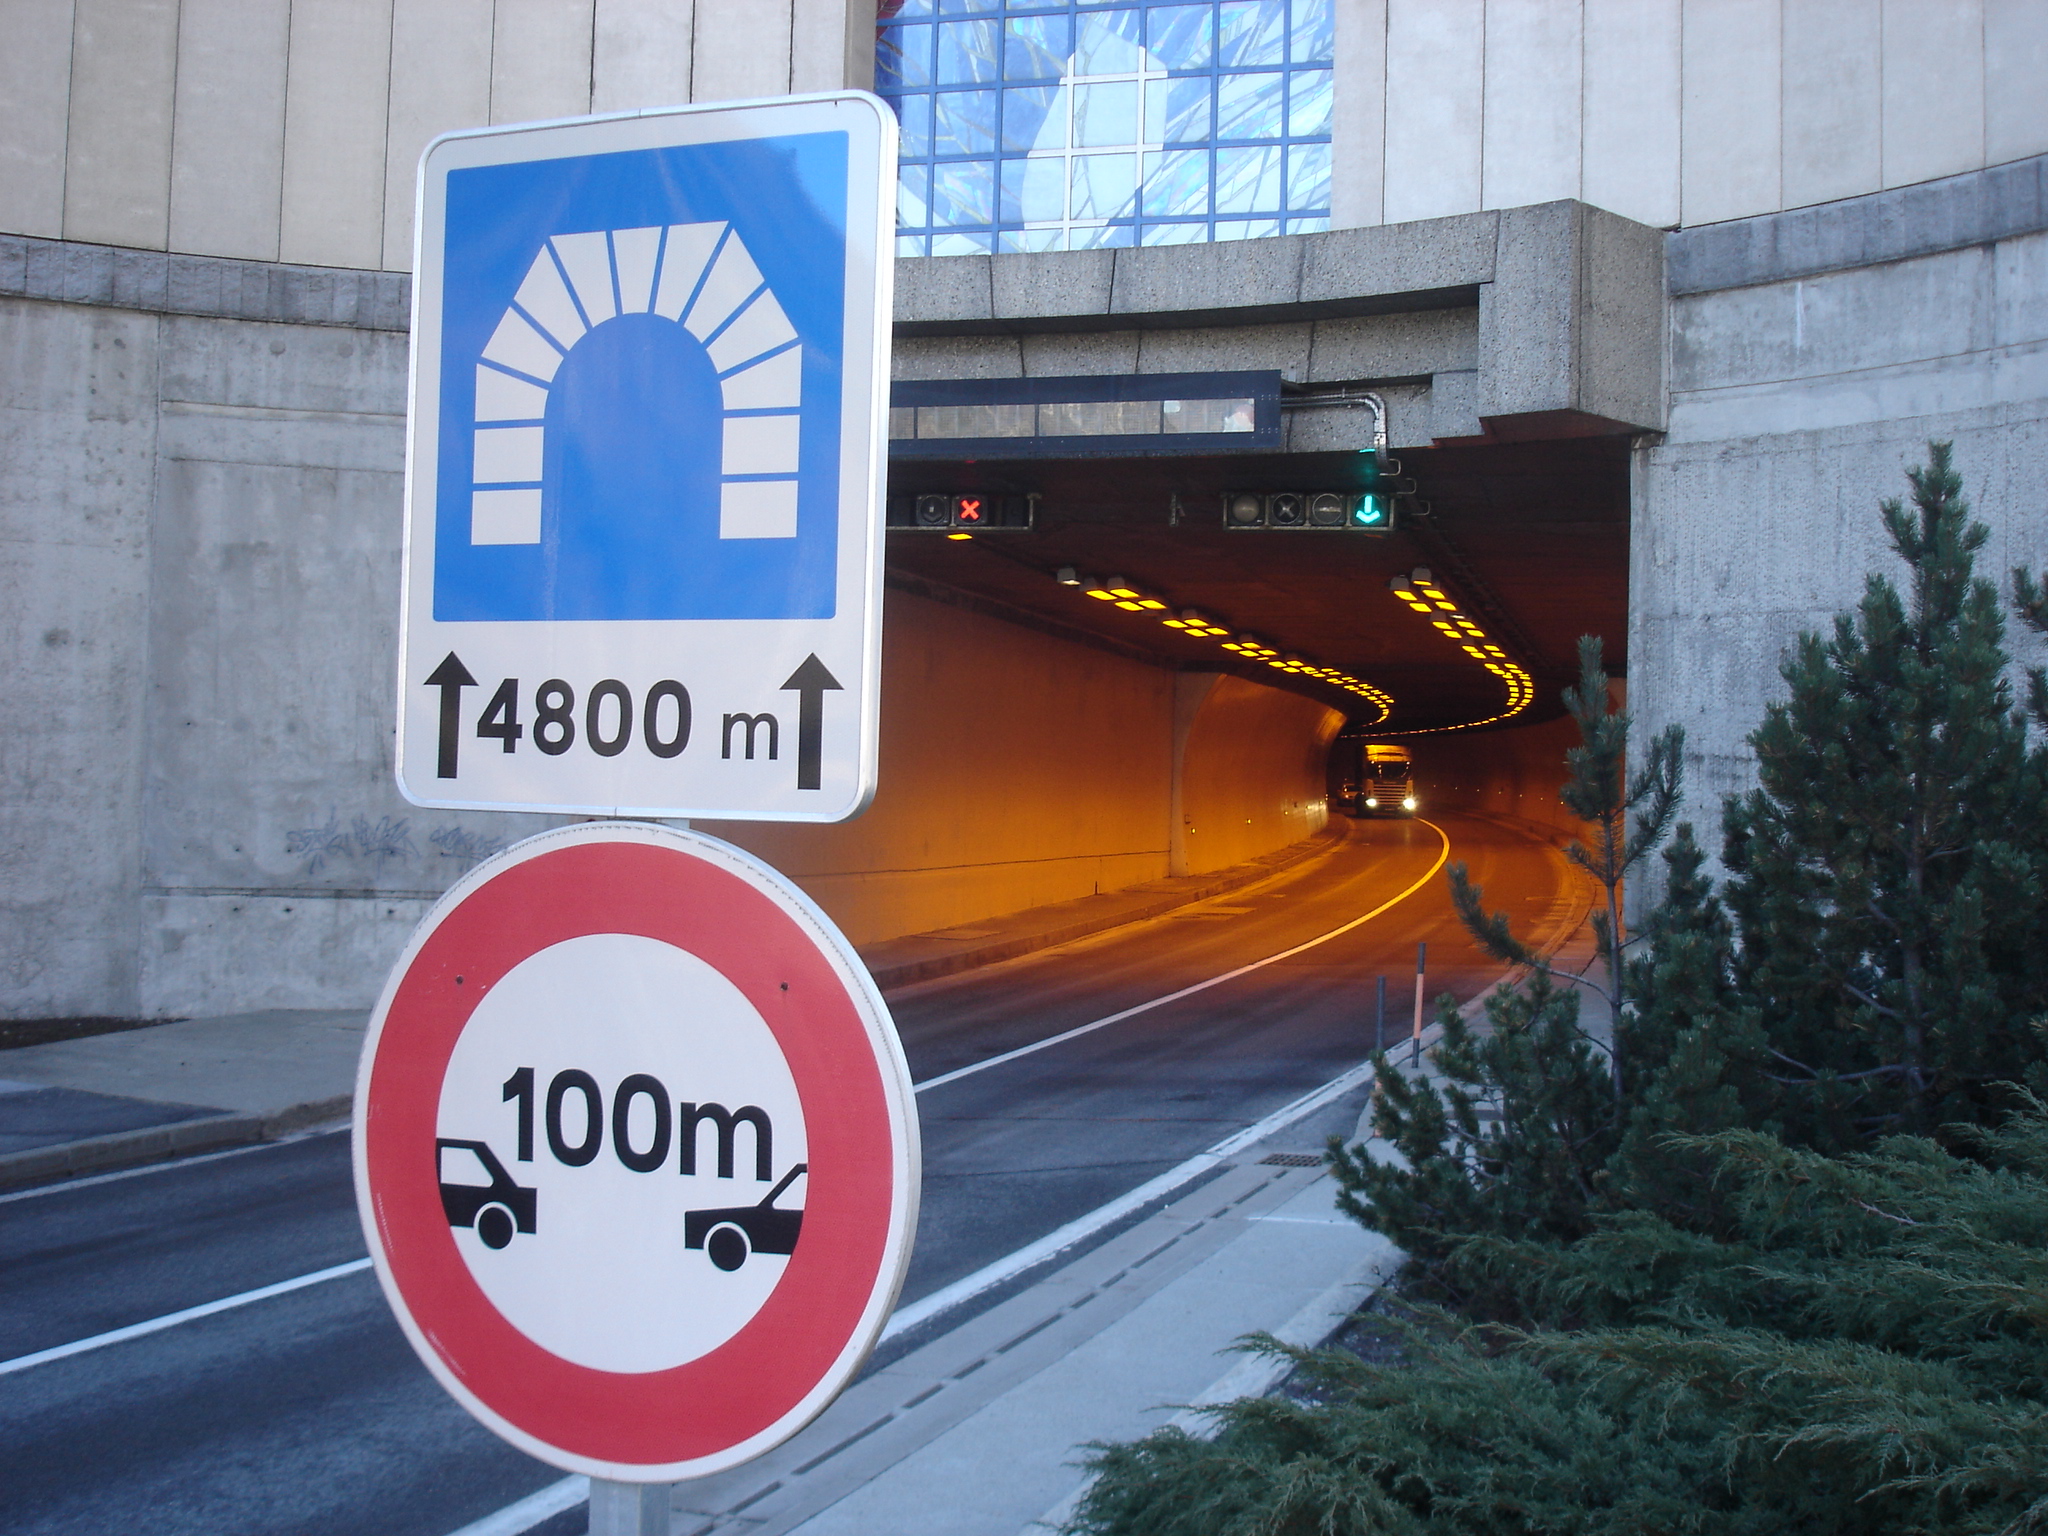 Figure 2: Signs at a portal showing the length of the tunnel and the distance to be kept between vehicles